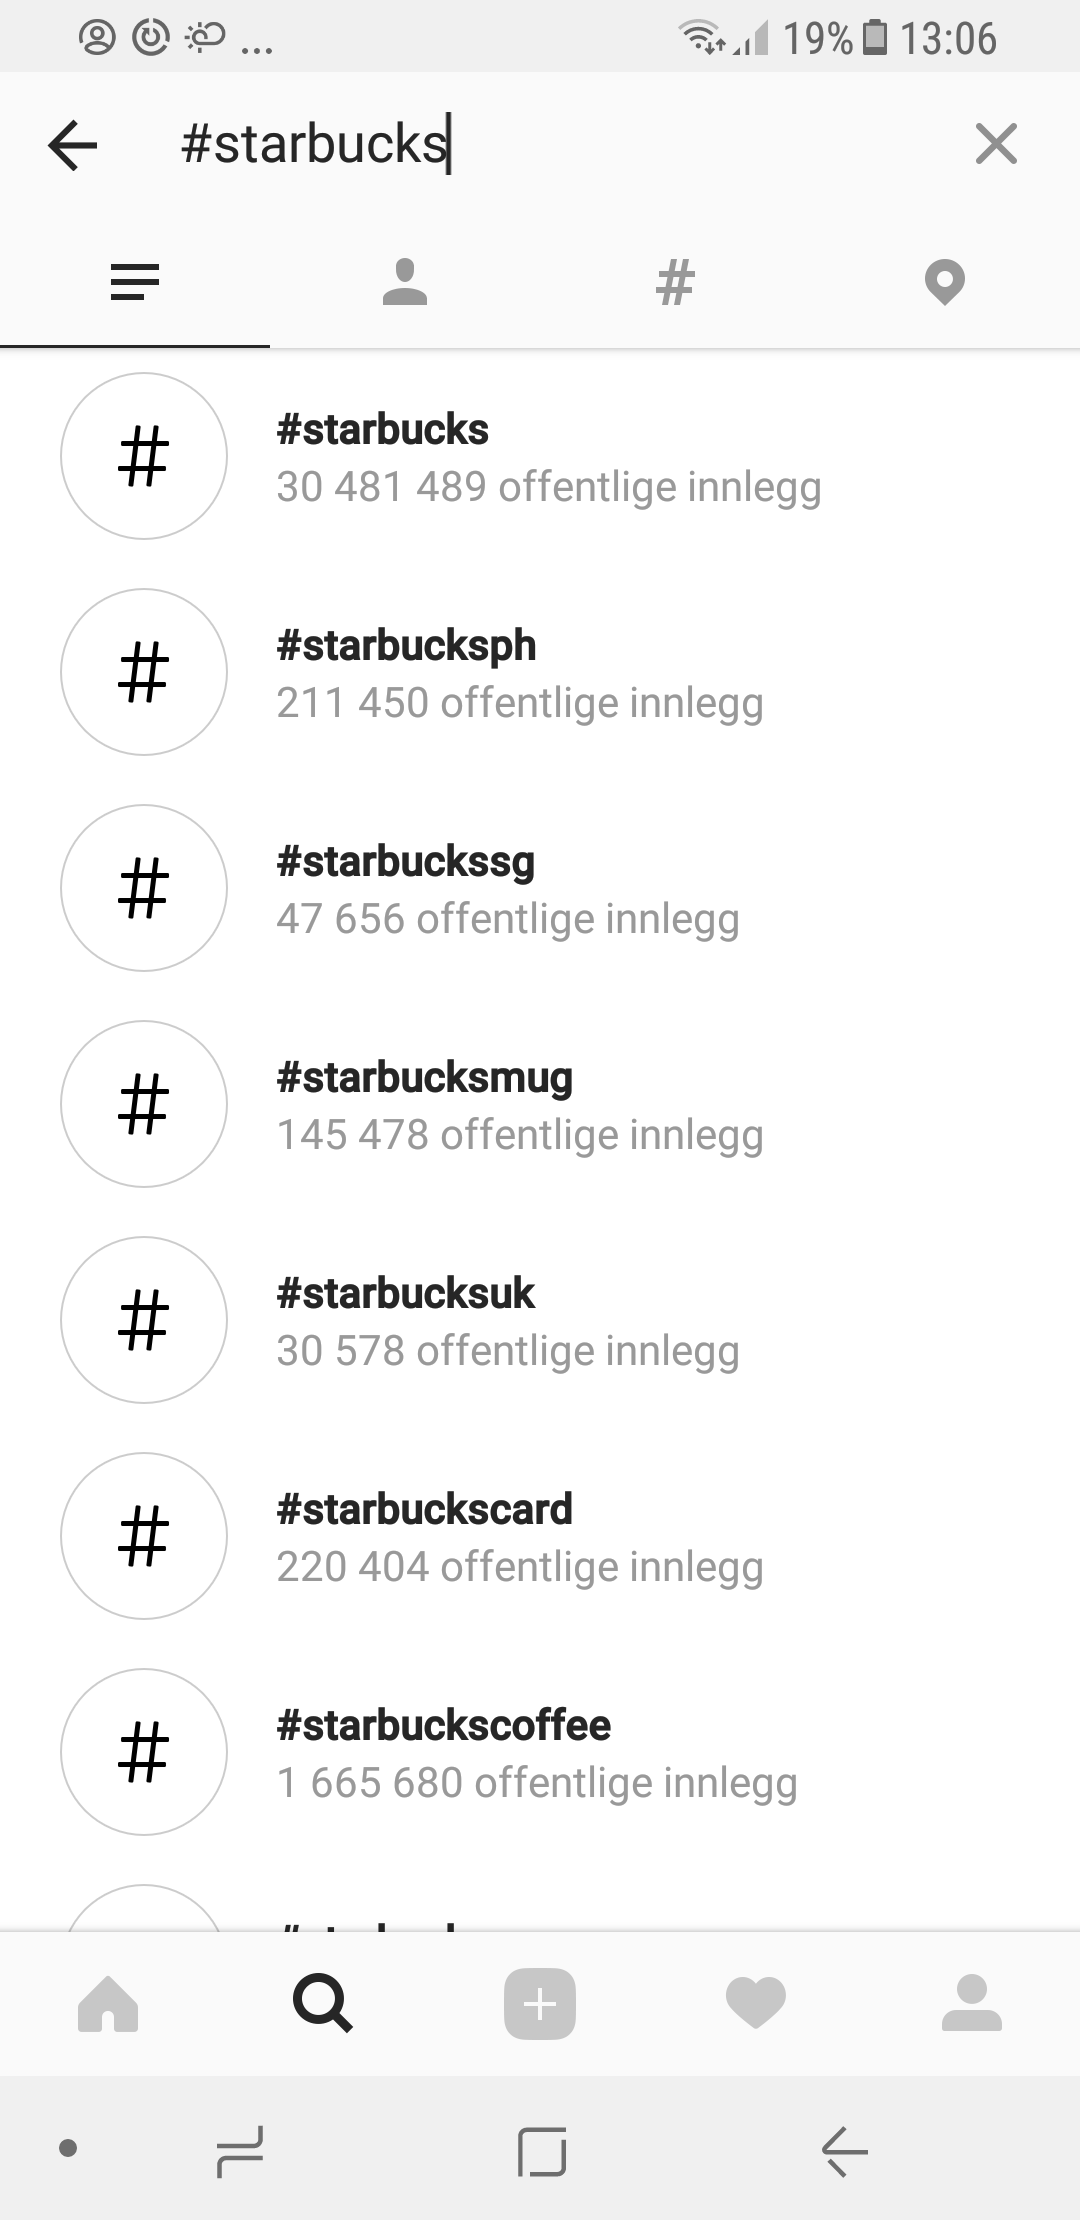 starbucks hashtag numbers.png